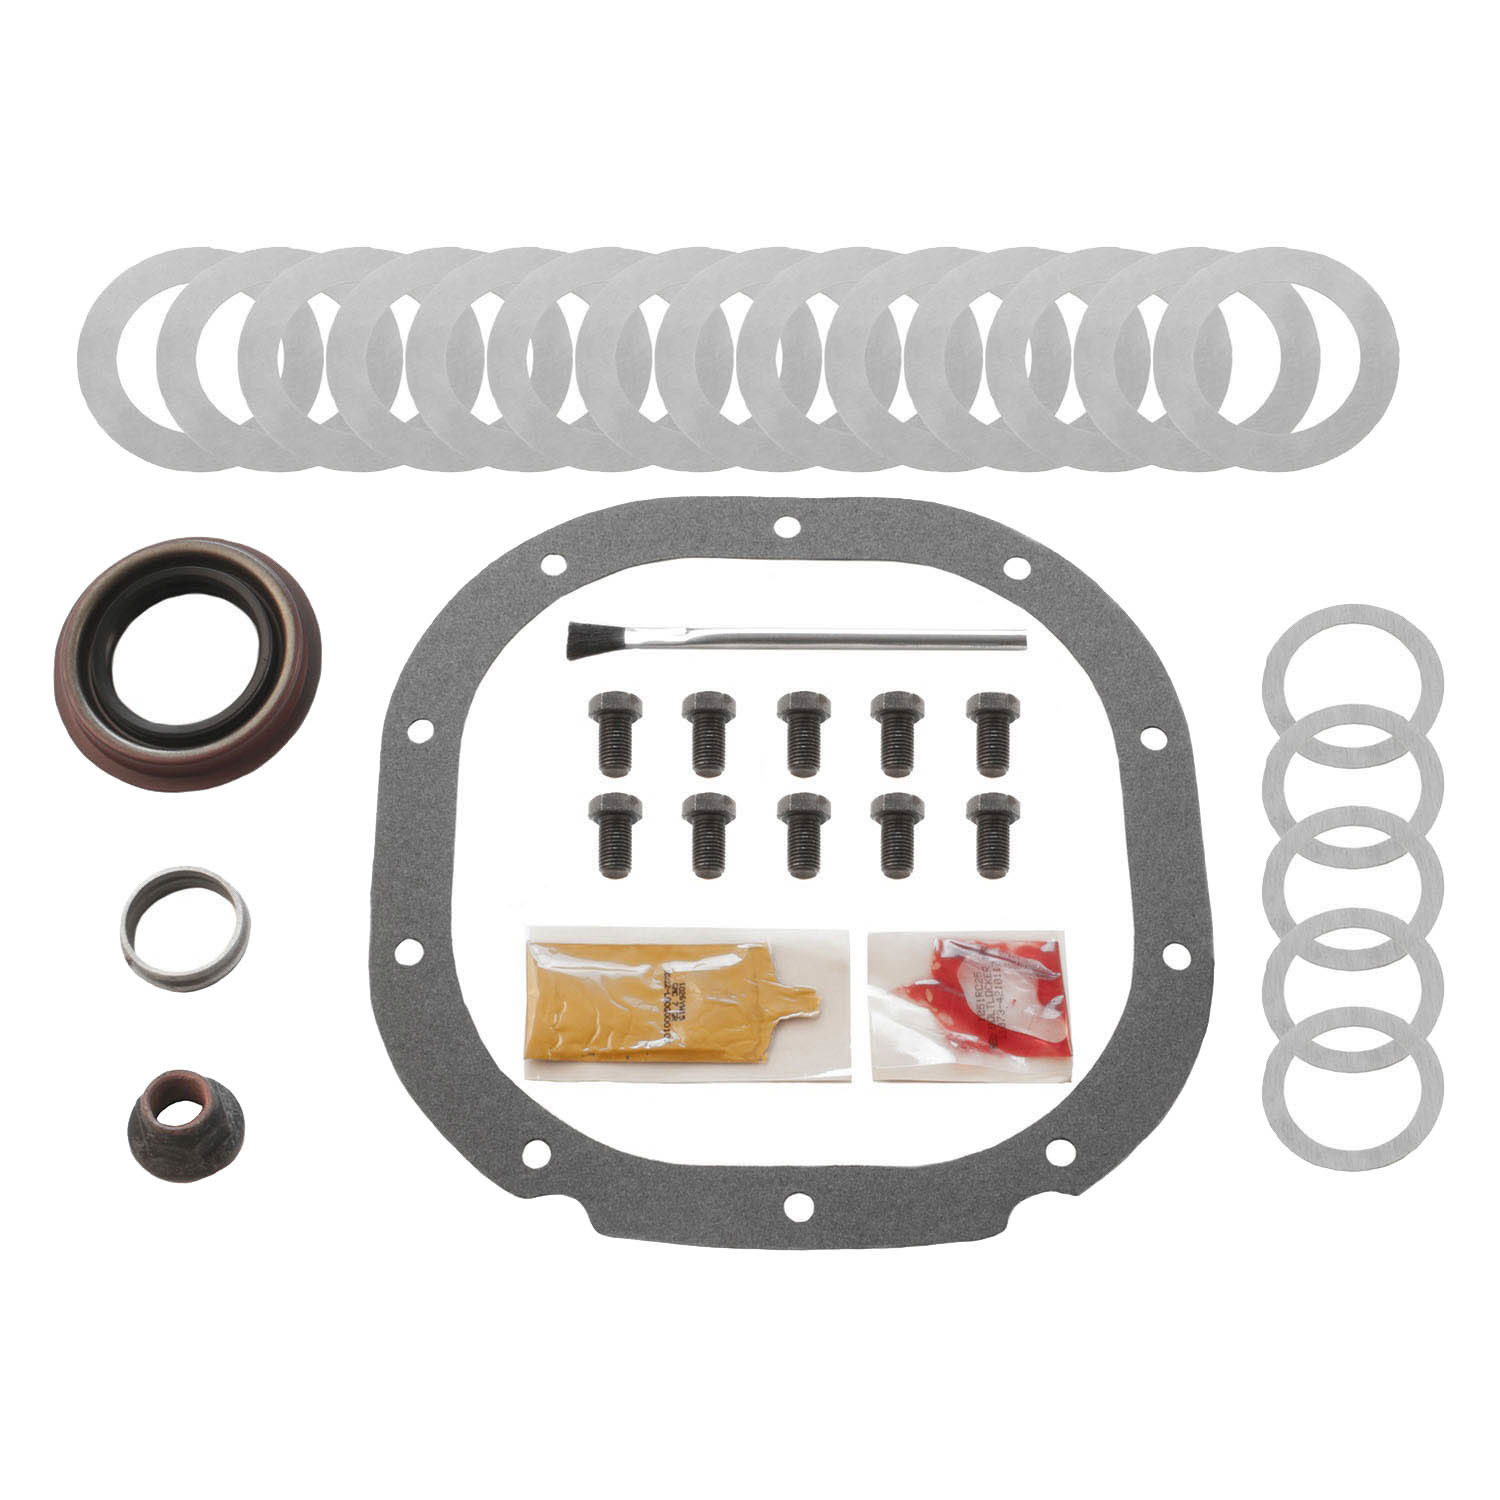 Richmond Gear 83-1043-B - Differential Installation Kit, Cover Gasket / Crush Sleeve / Pinion Seal / Pinion Shims, Ford 8.8 in, Kit